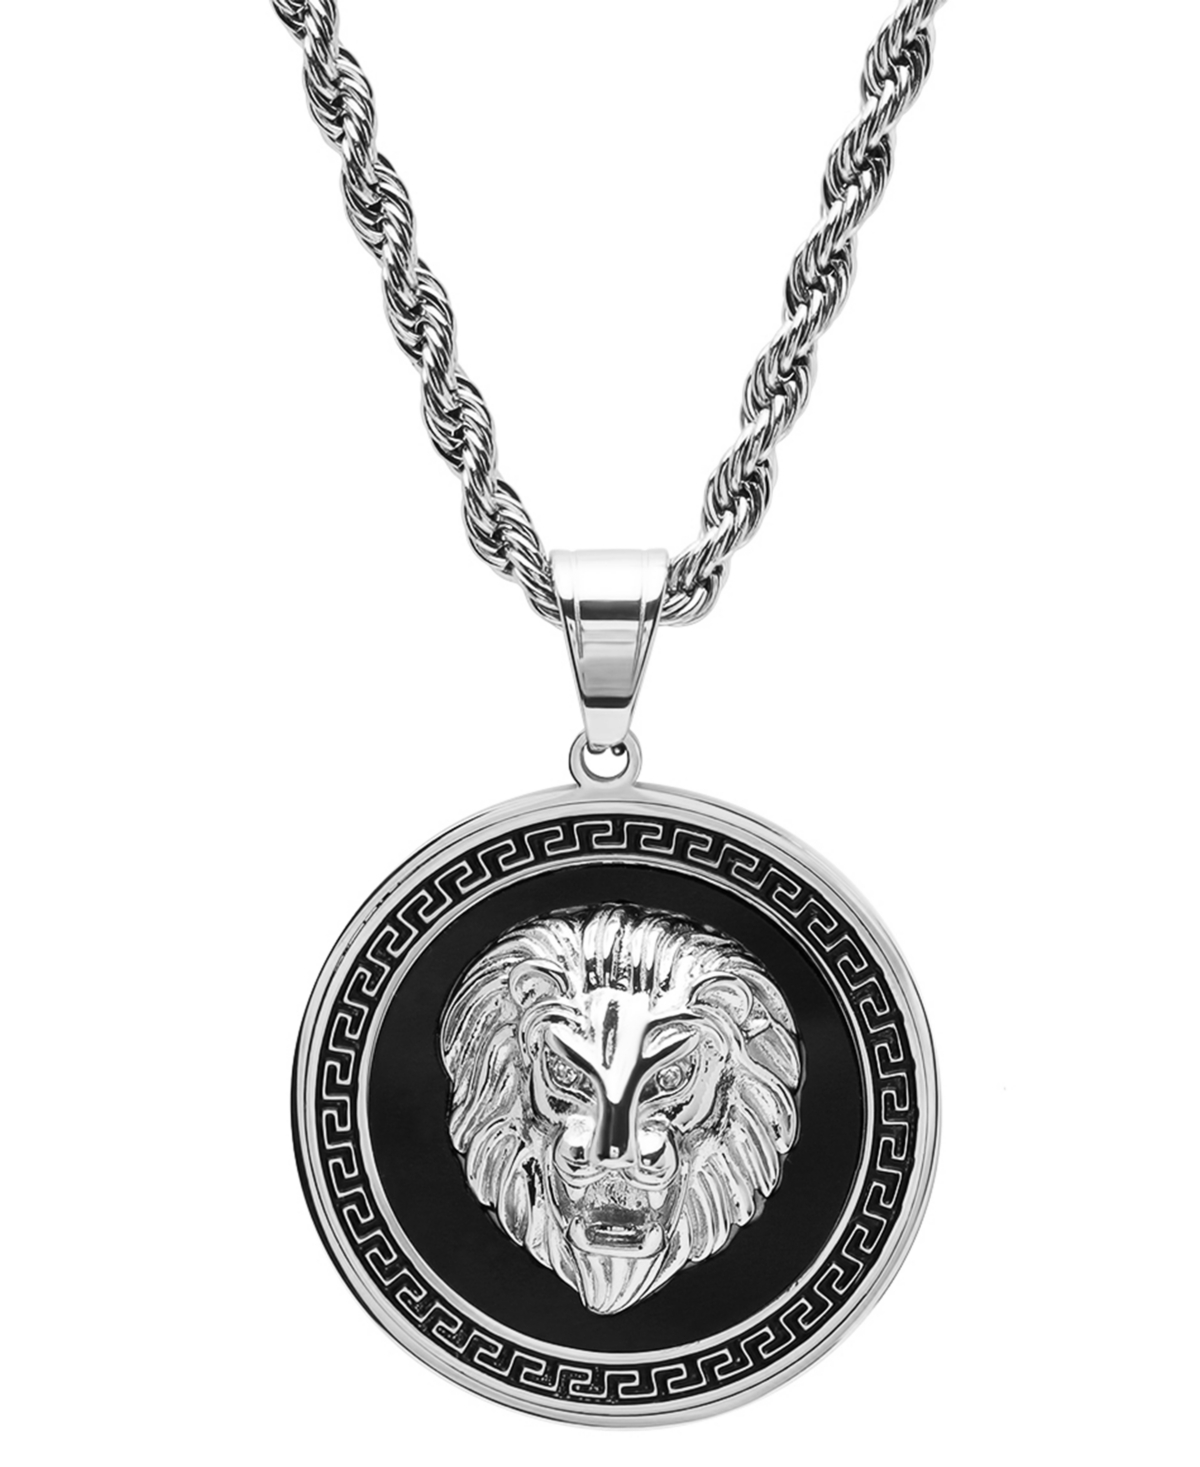 Men's Two-Tone Stainless Steel Simulated Diamond Lion Head On Greek Key Mount 24" Pendant Necklace - Black, Silver